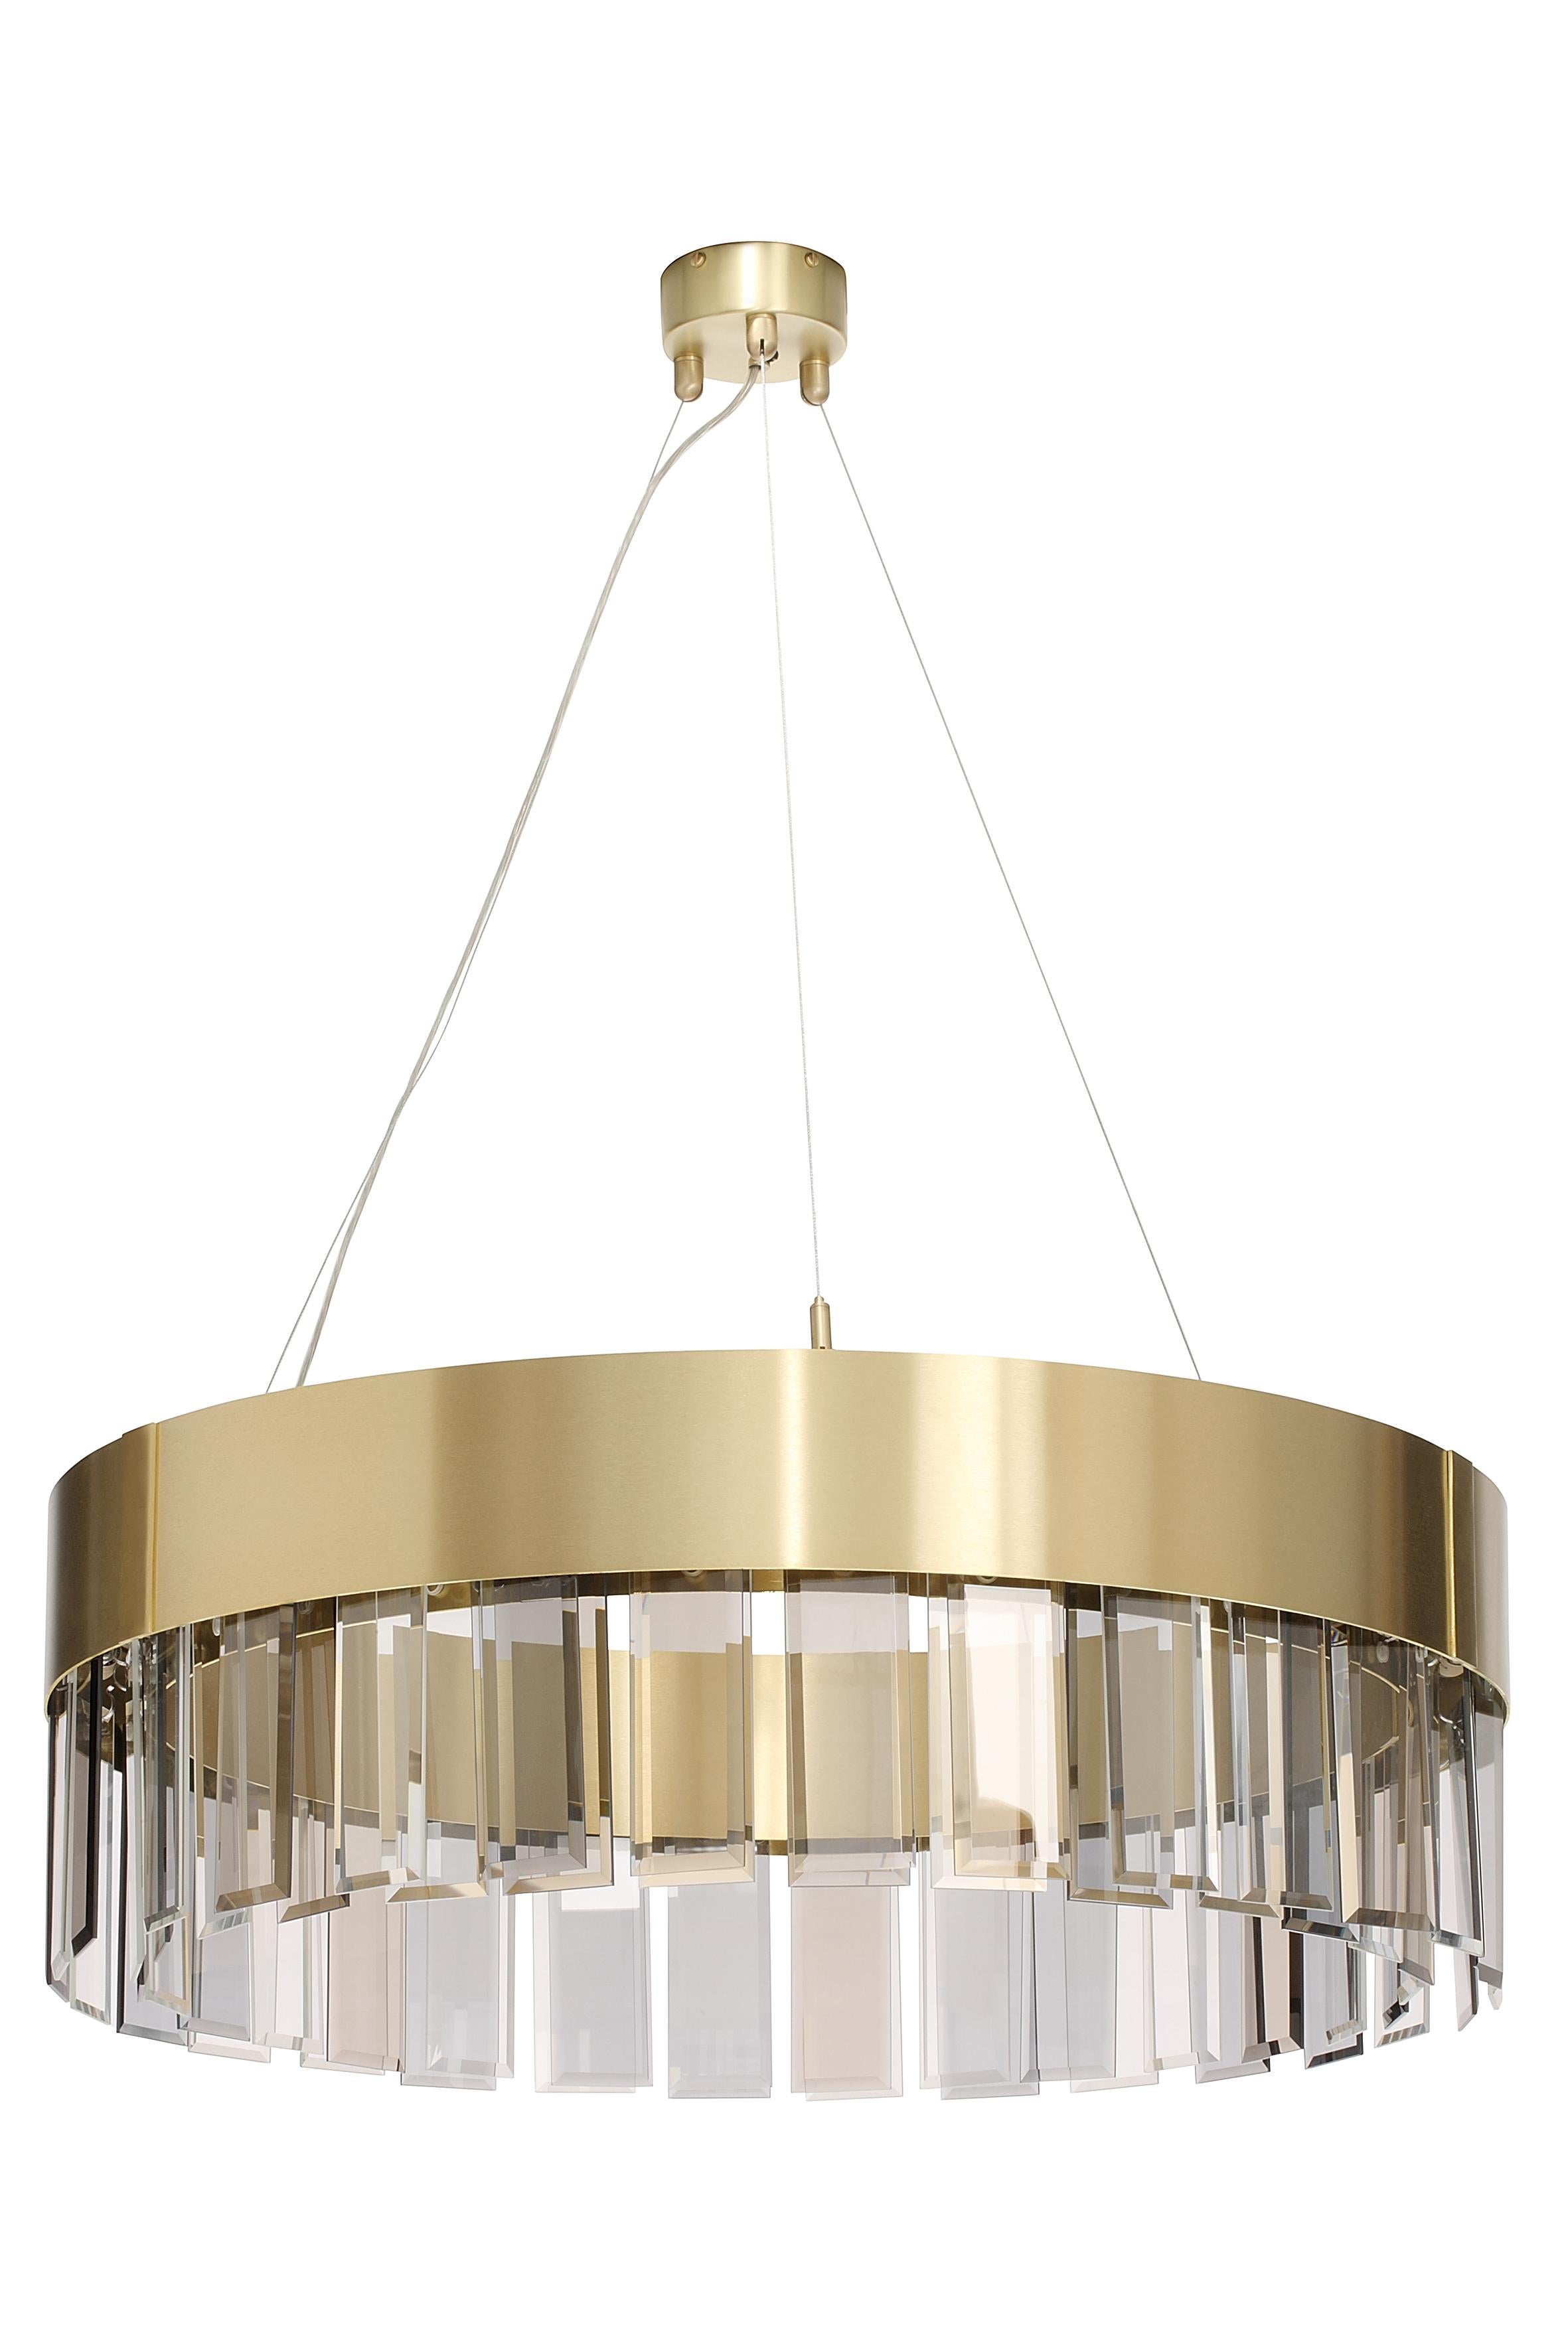 Solaris 700 pendant by CTO Lighting
Materials: satin brass with cut glass drops and stainless steel suspension wire/clear flex
Dimensions: H 25 x W 70 cm 

All our lamps can be wired according to each country. If sold to the USA it will be wired for